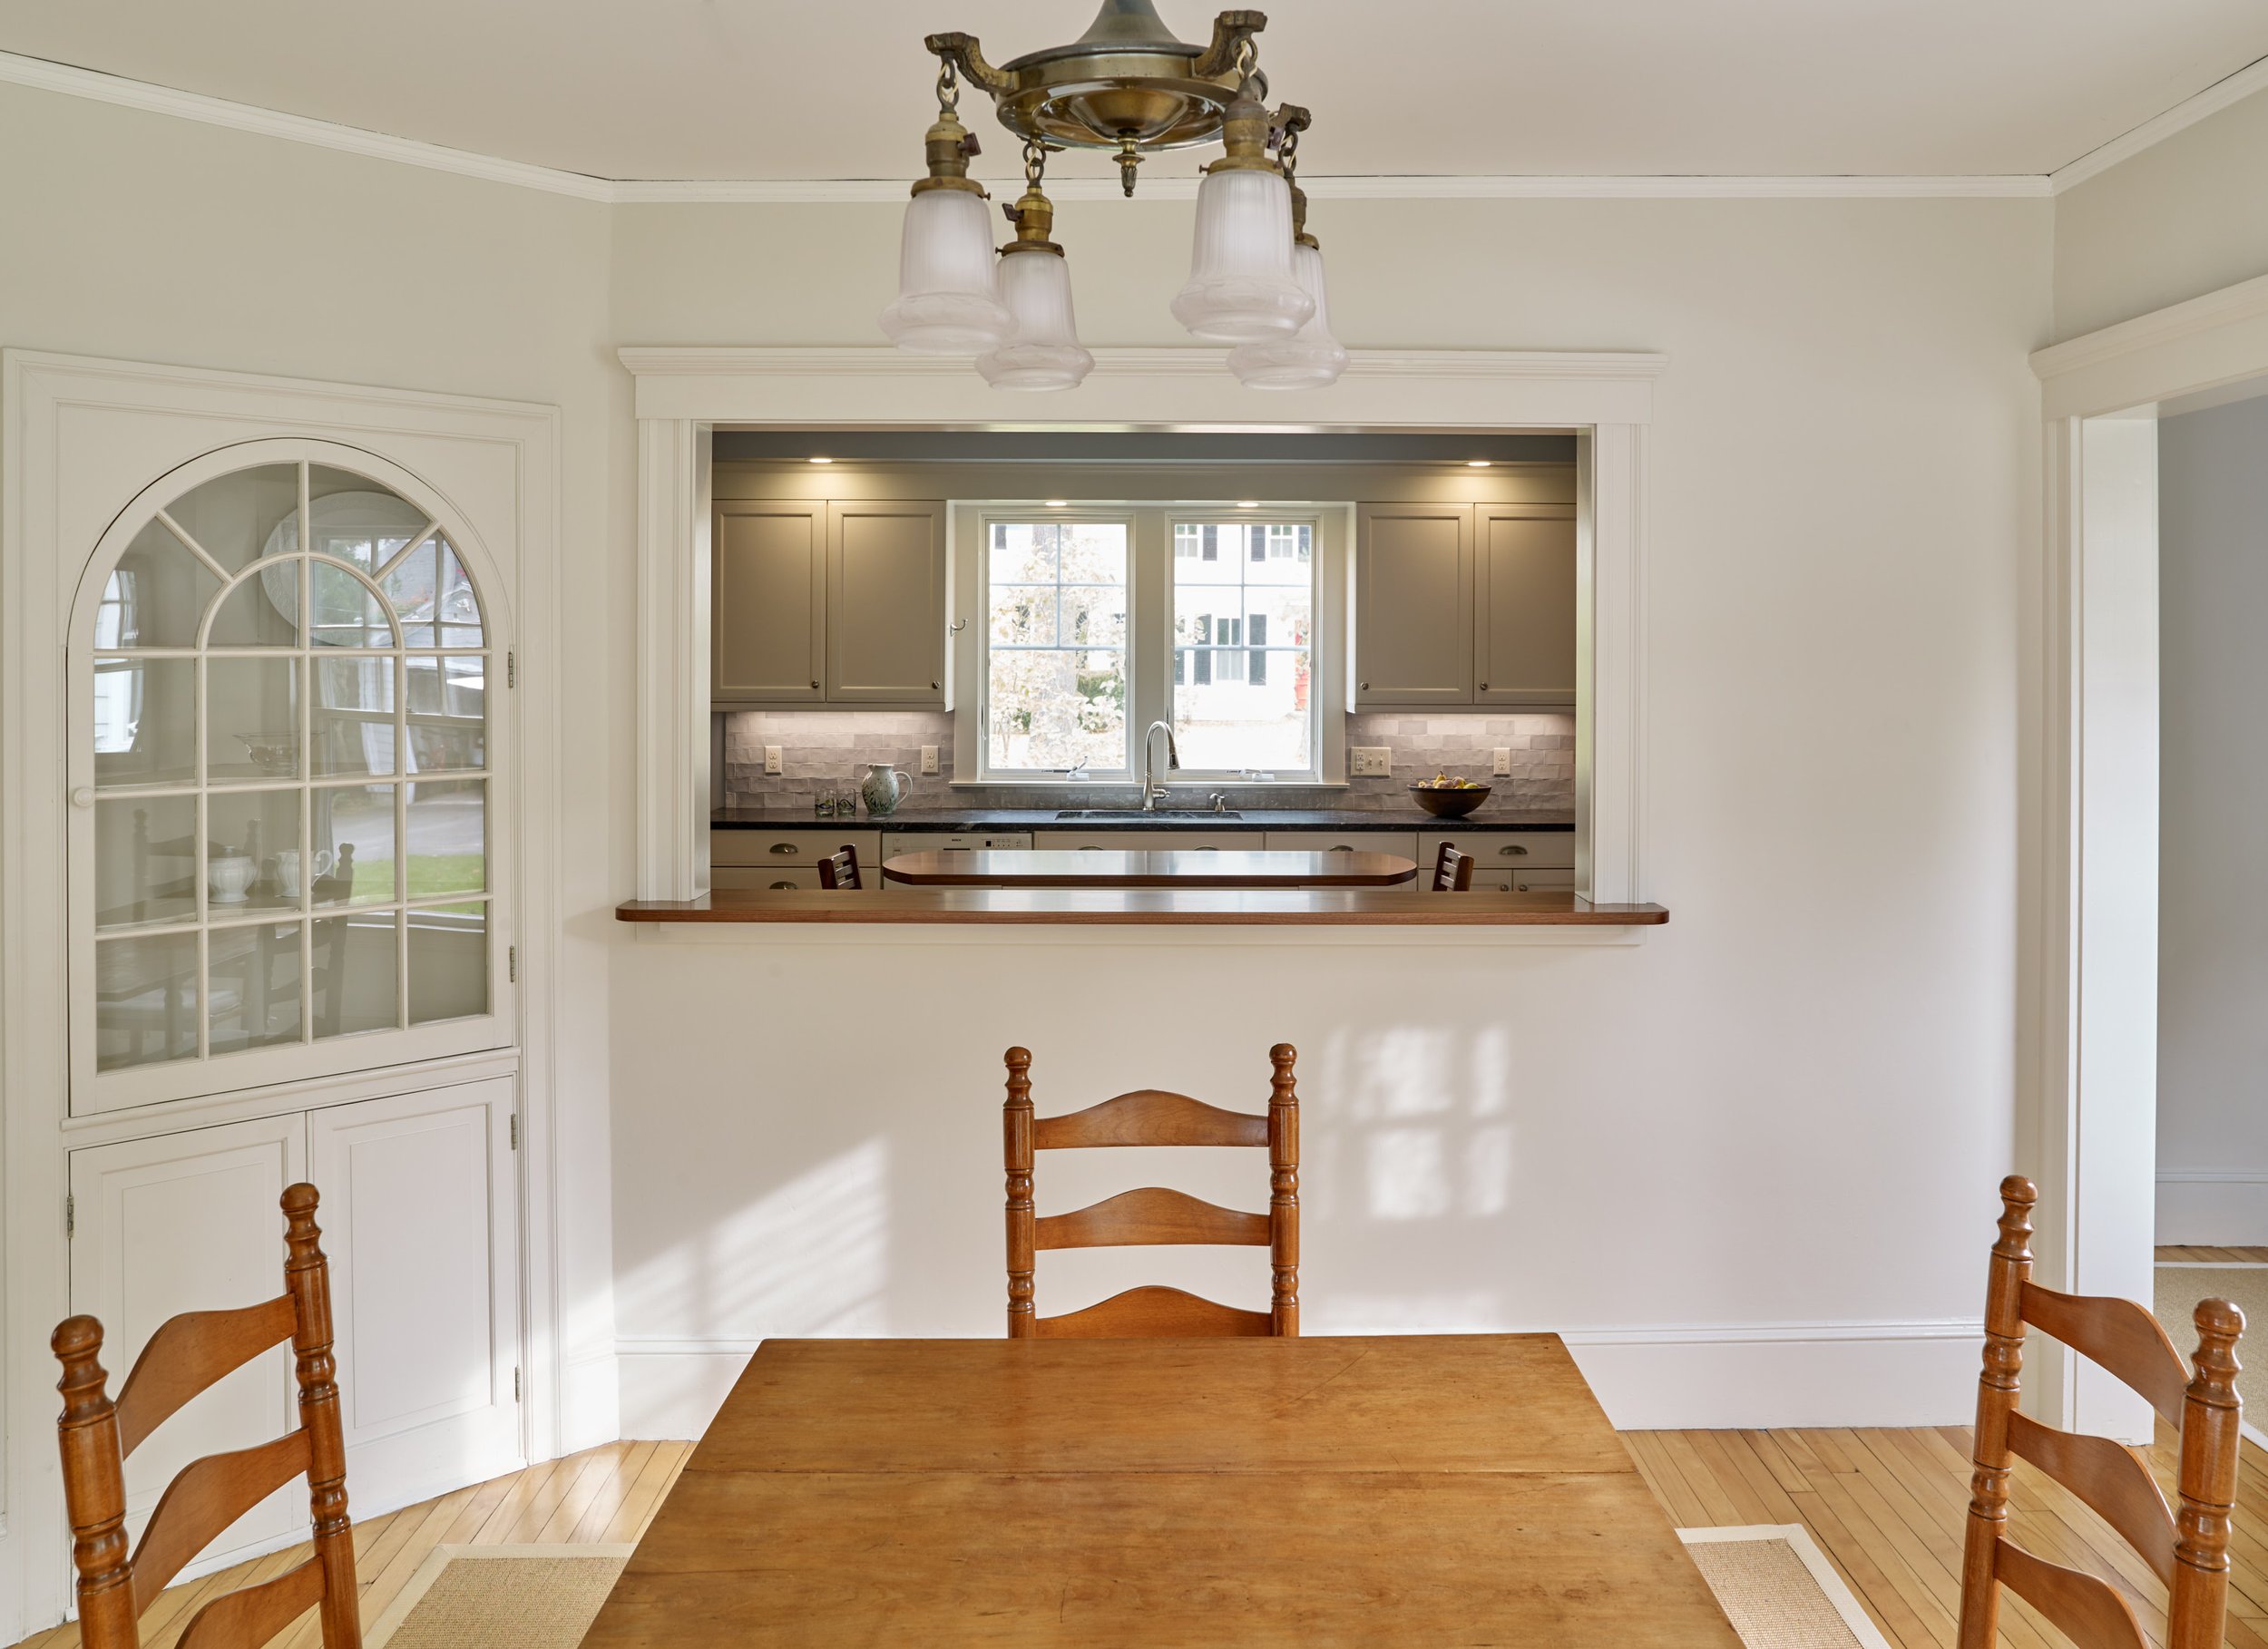  SHINGLE STYLE UPDATE  Dining room looking  into the kitchen via the pass-through window 